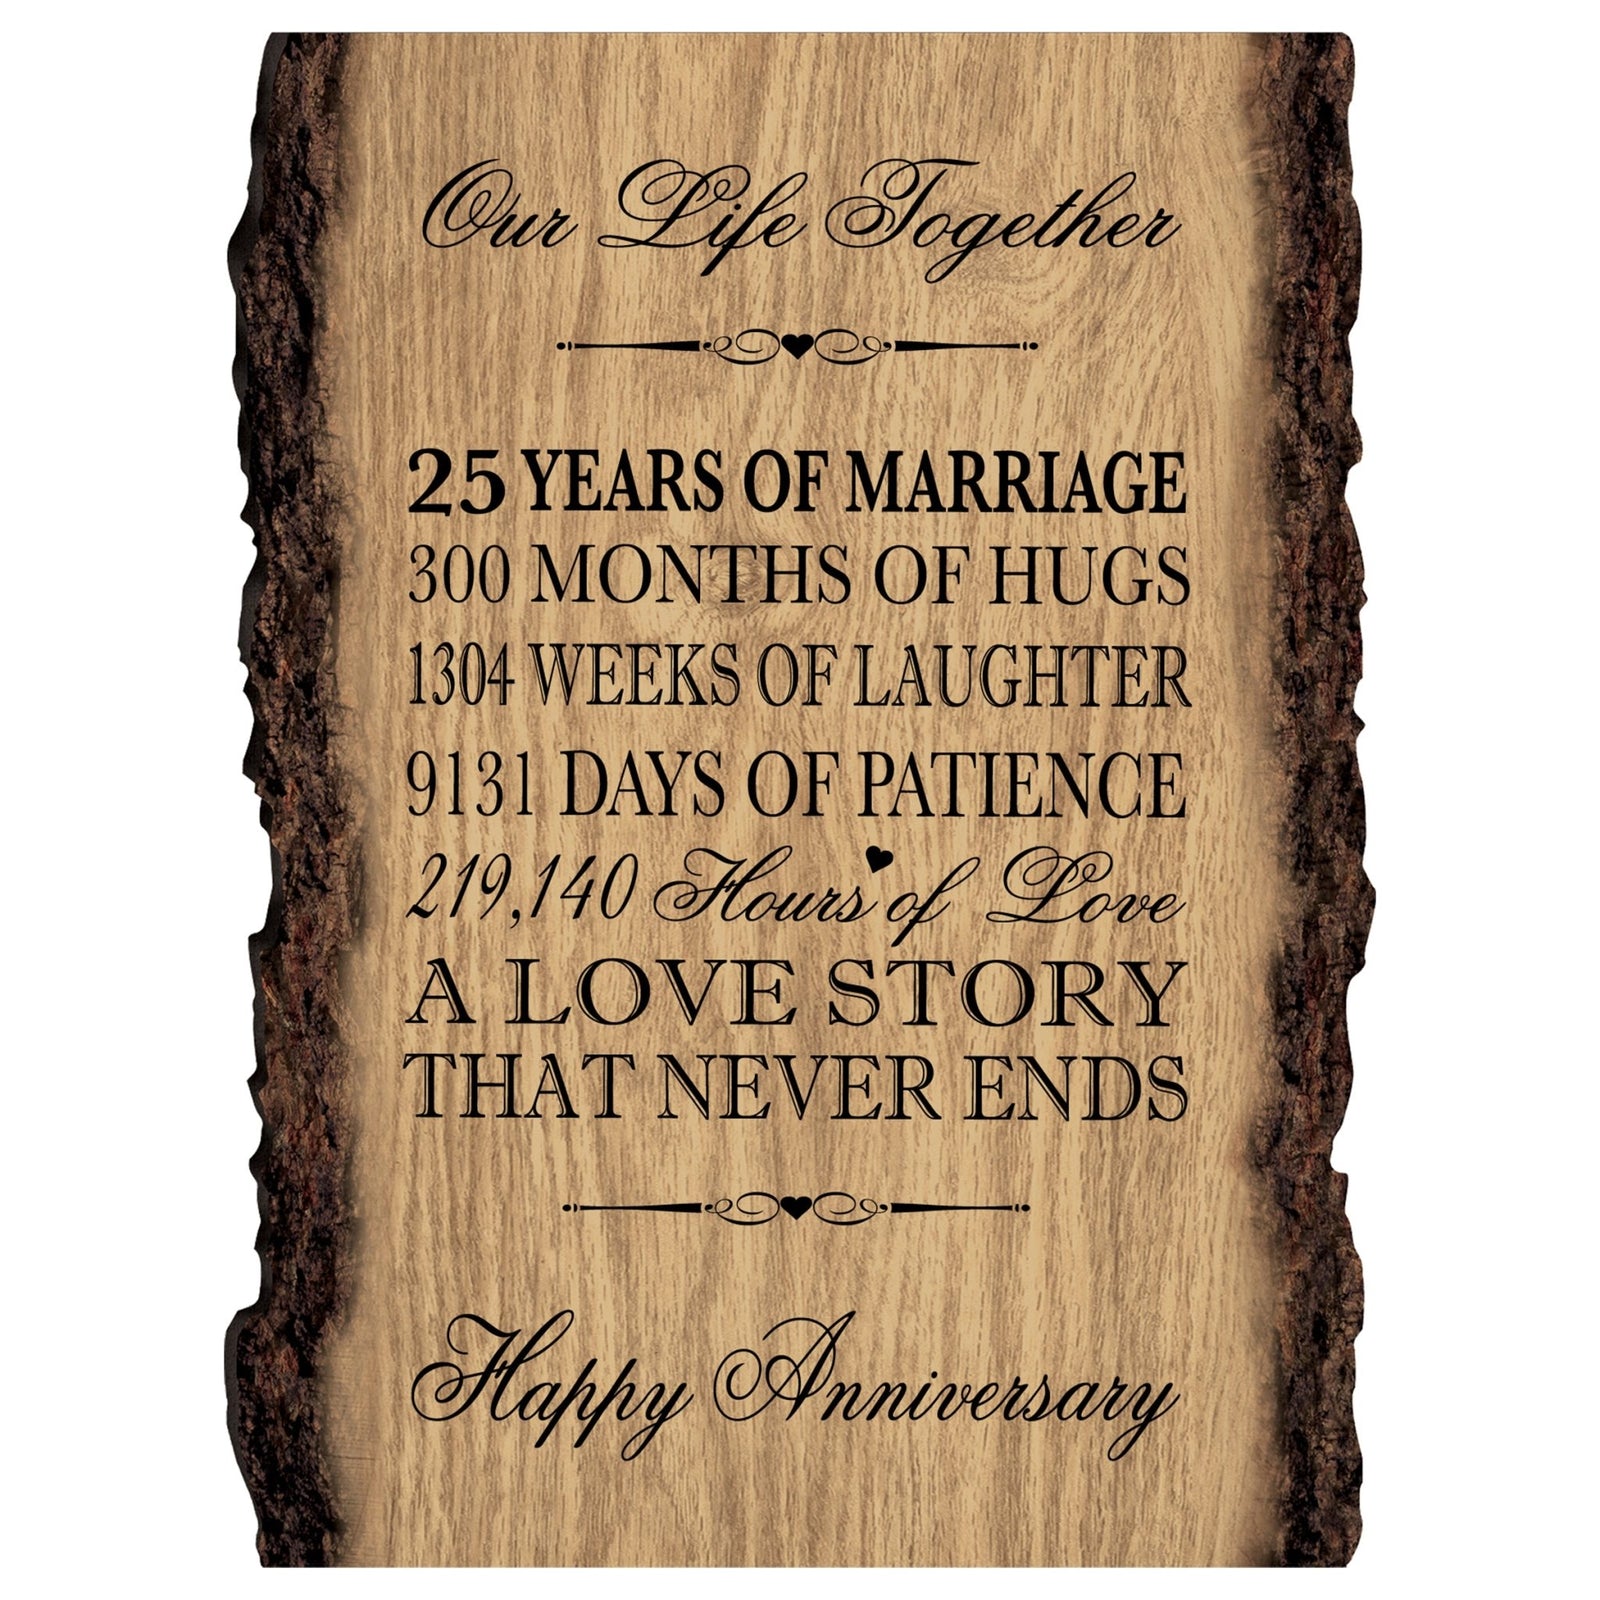 Rustic Wedding Anniversary 9x12 Barky Wall Plaque Gift For Parents, Grandparents New Couple - 25 Years Of Marriage - LifeSong Milestones